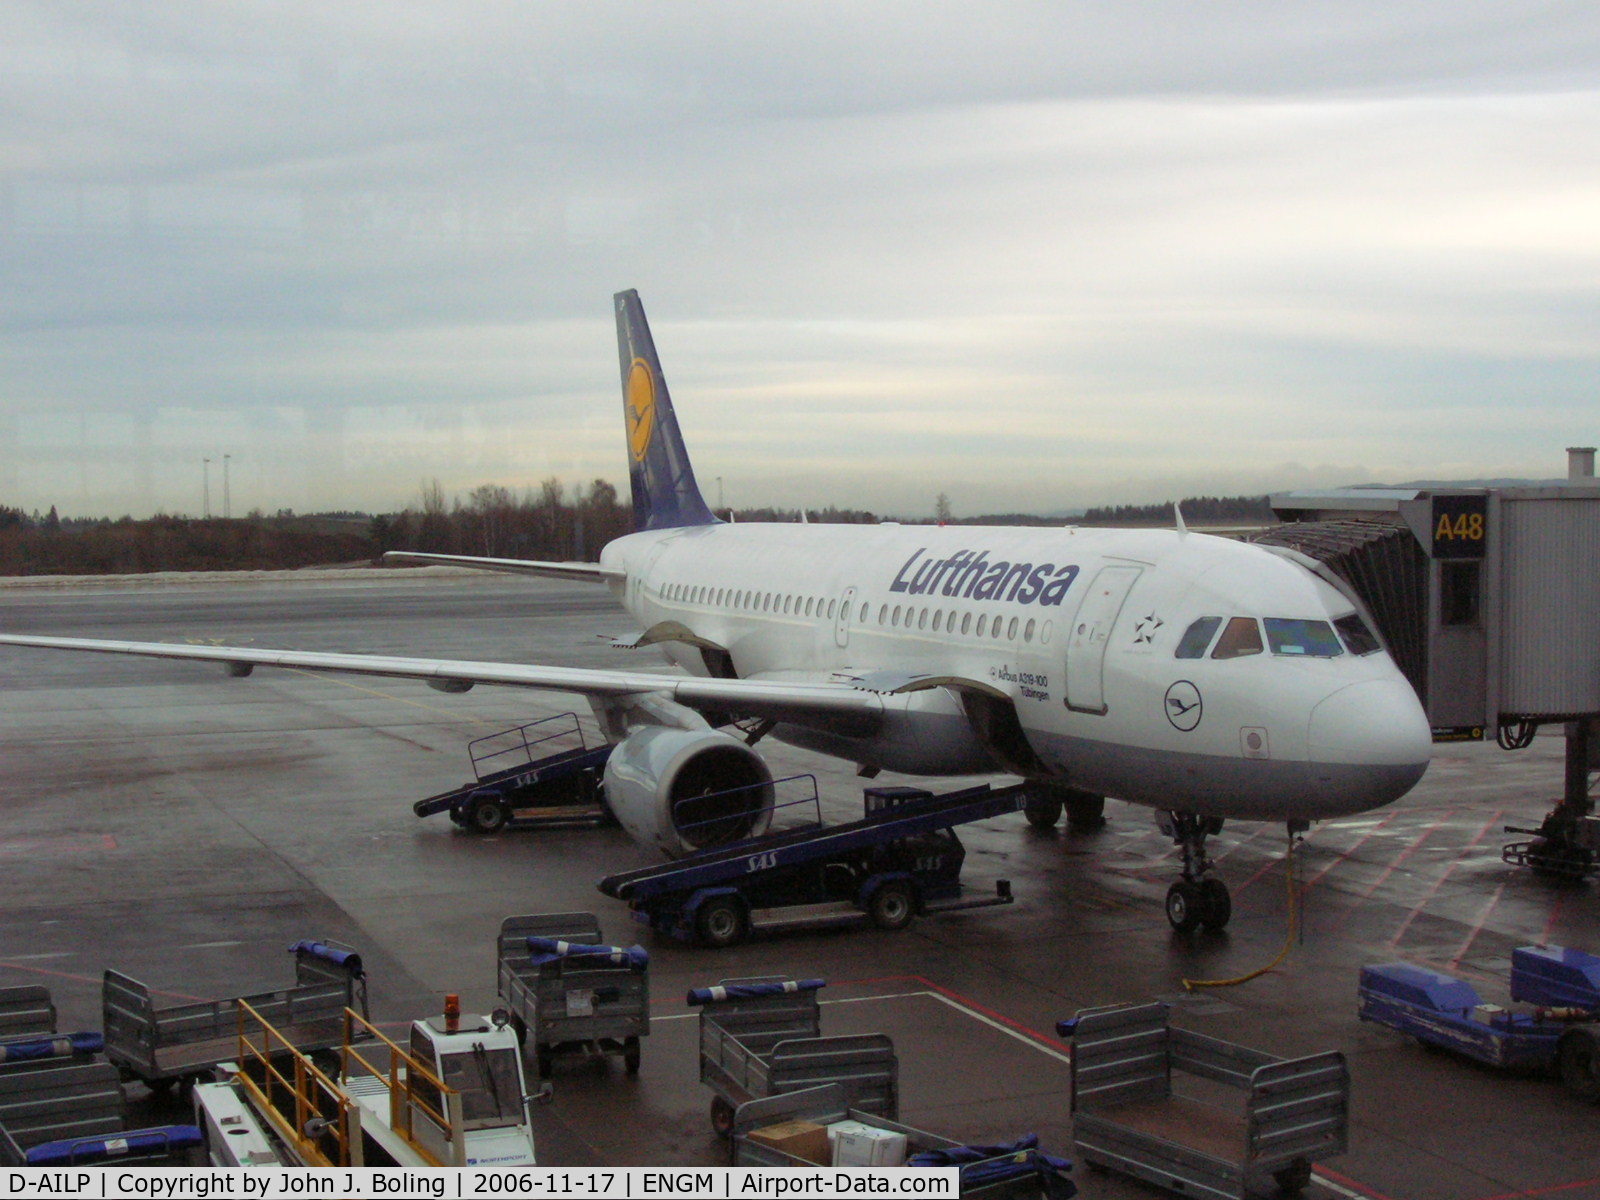 D-AILP, 1997 Airbus A319-114 C/N 717, Lufthansa A319-100 at gate in Oslo, Norway